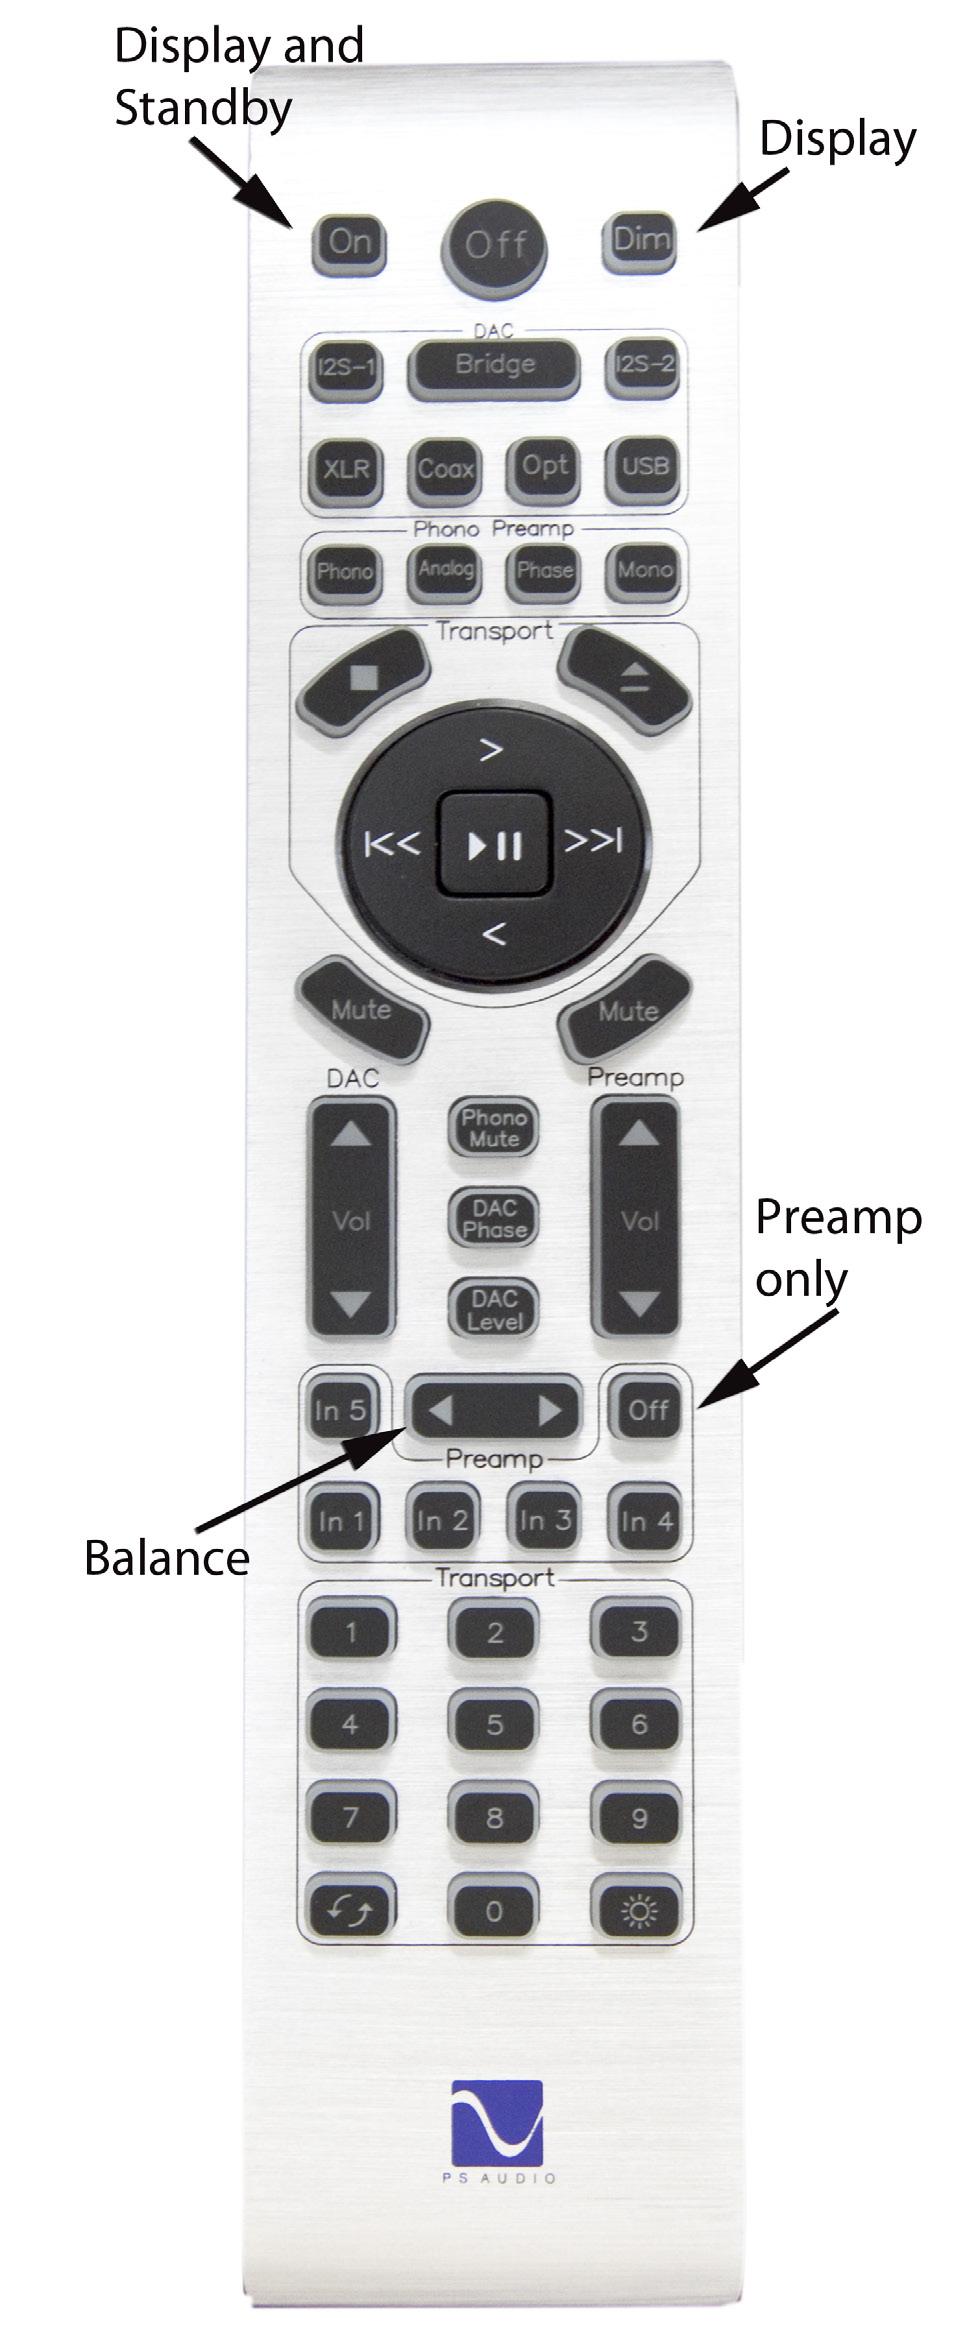 ON The master ON button will take all PS Audio PerfectWave products out of Ready (Standby) mode.